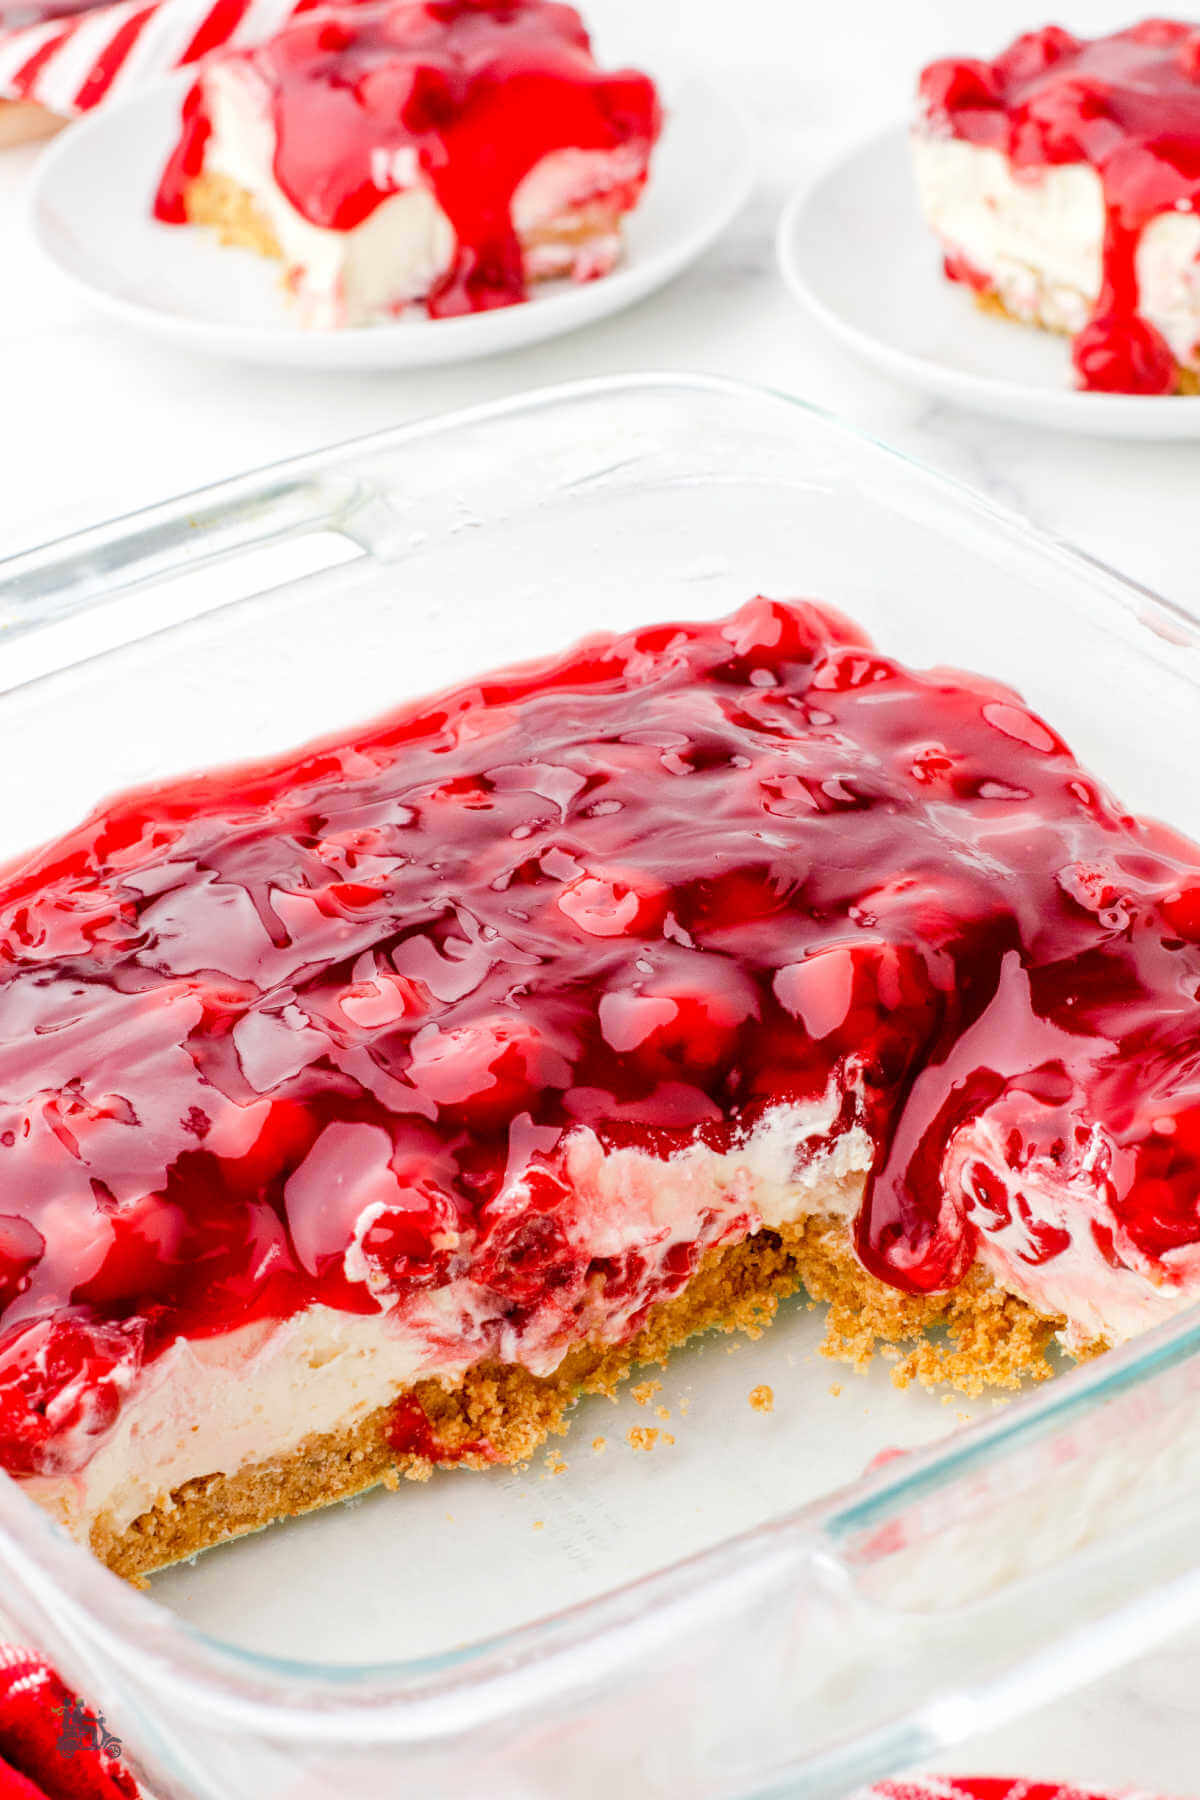 Baking Dish with two servings of Cherry Supreme Dessert plated. 